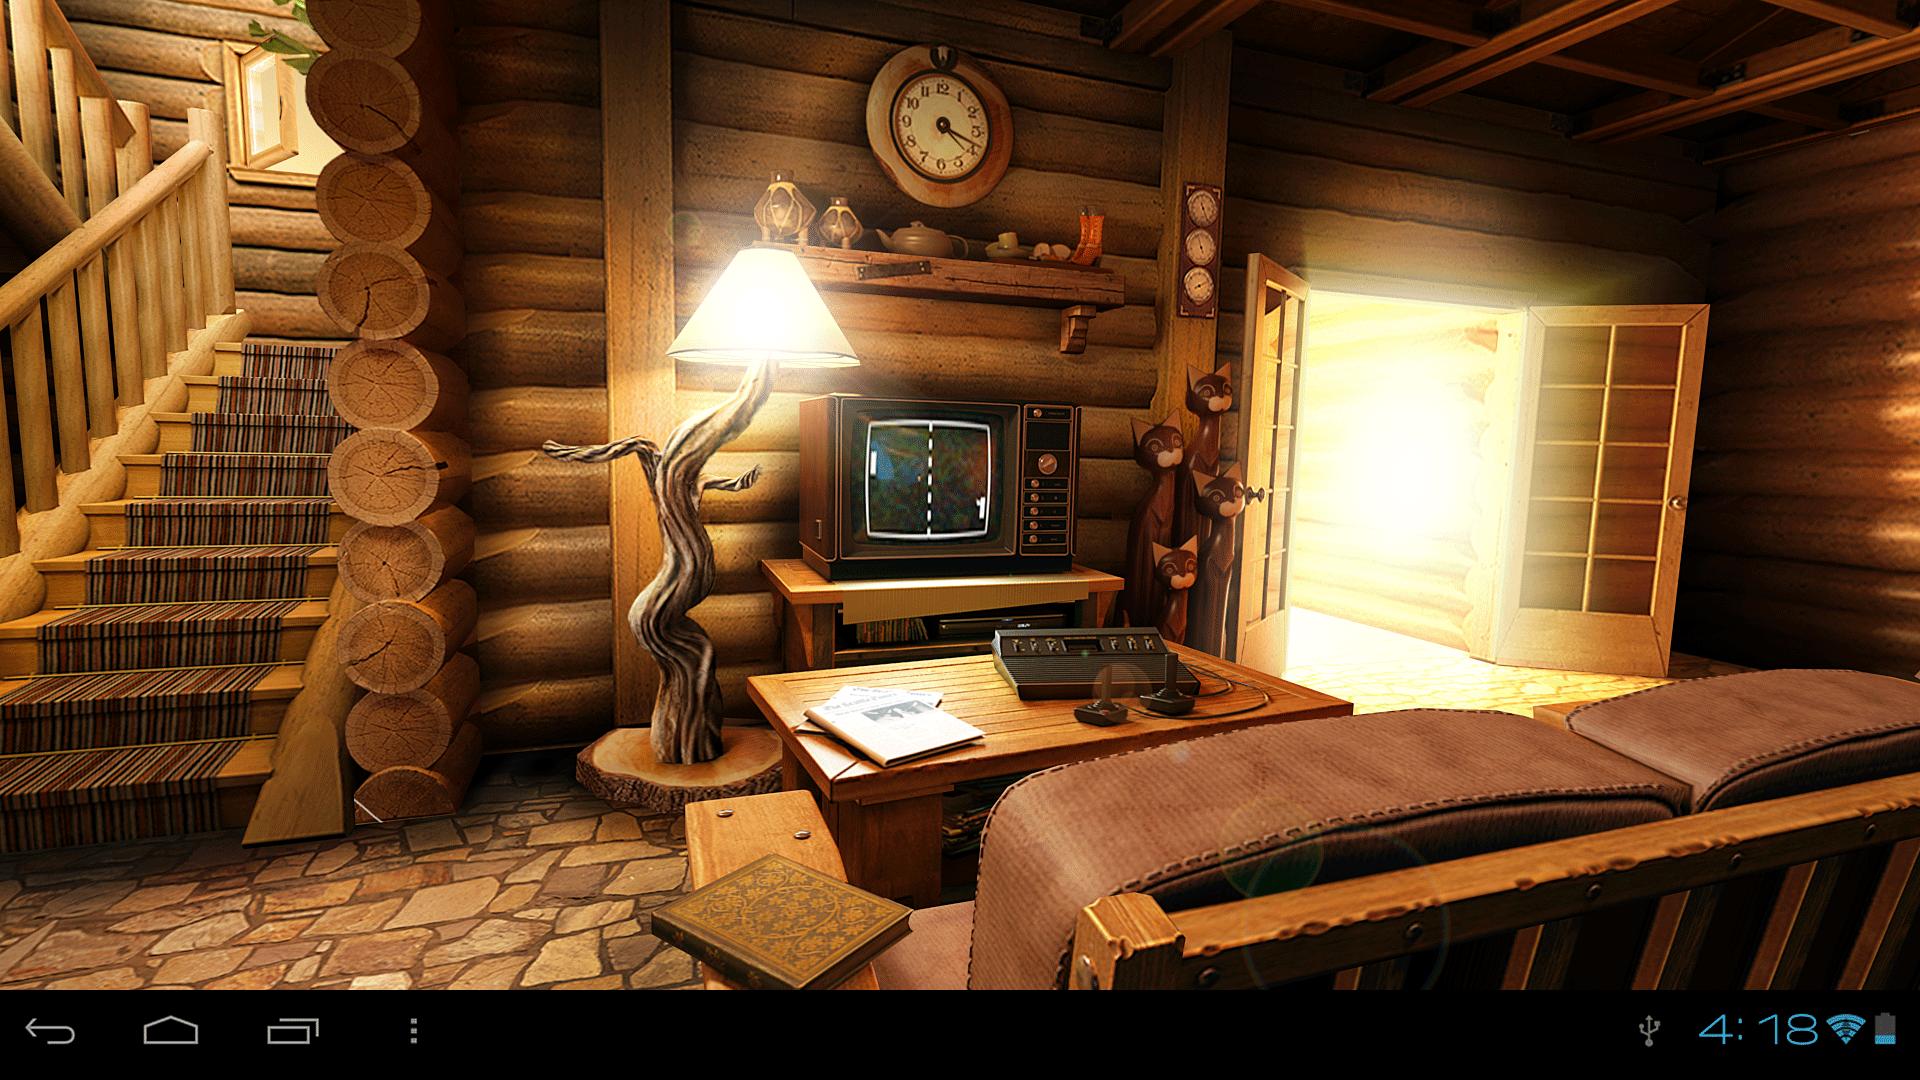 My Log Home 3d Wallpaper Free For Android Apk Download